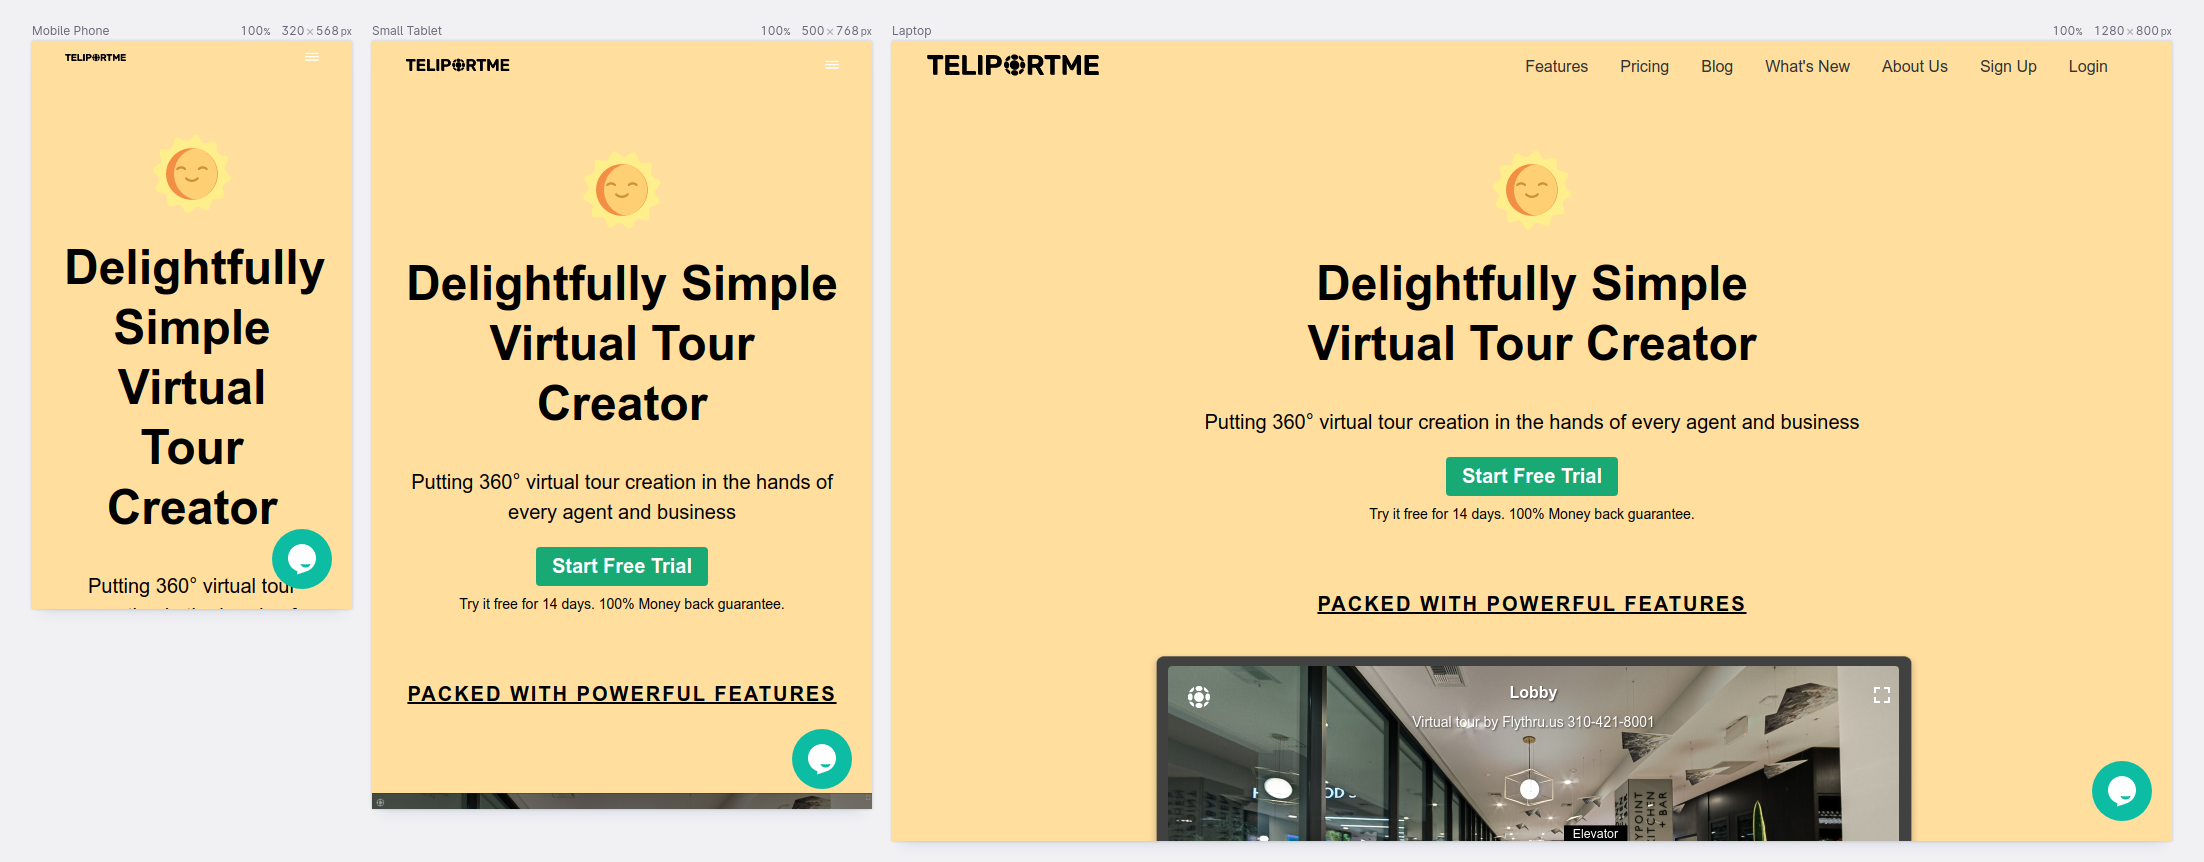 overview of Teliportme's feature page